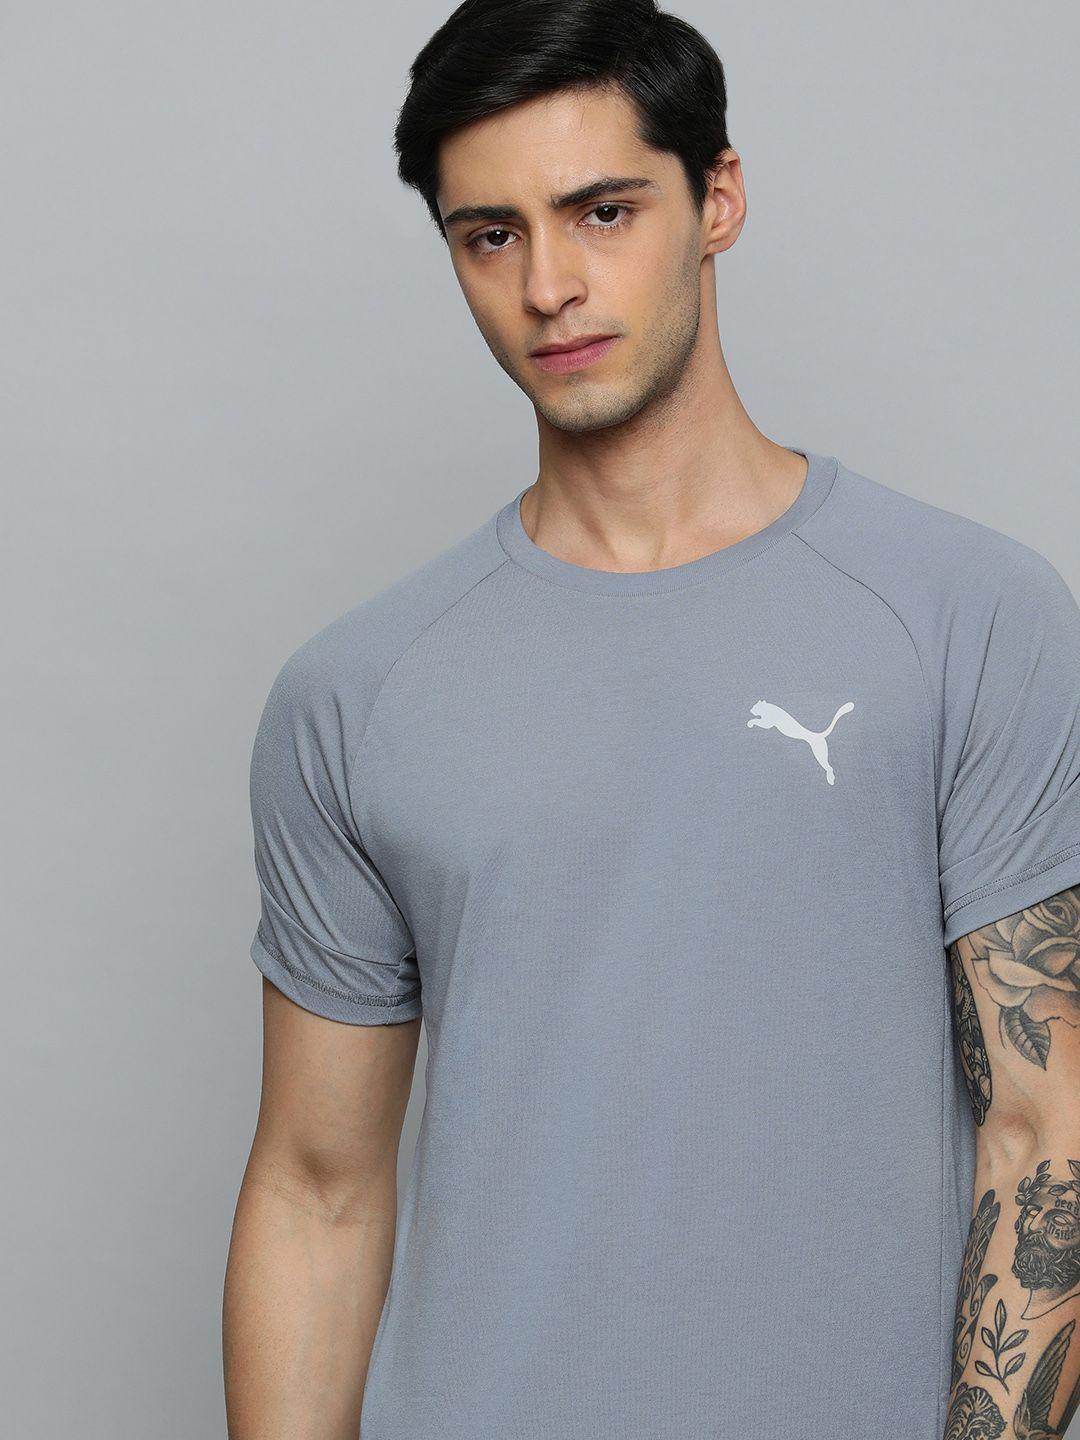 puma brand logo slim fit outdoor t-shirt with drycell technology